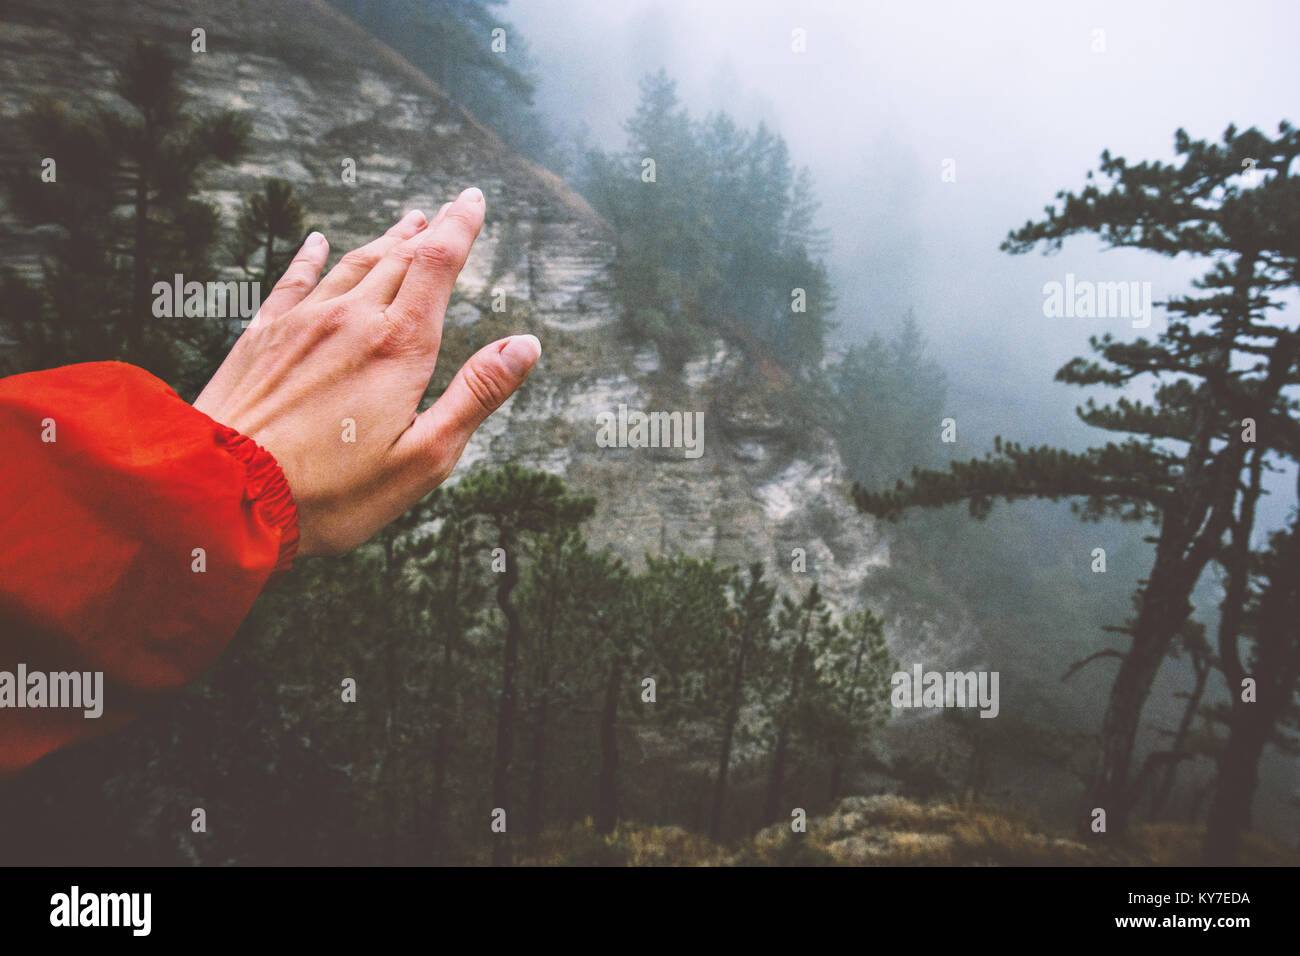 Hand selfie and foggy Forest Landscape scenic view Travel serene scenery rainy day Stock Photo